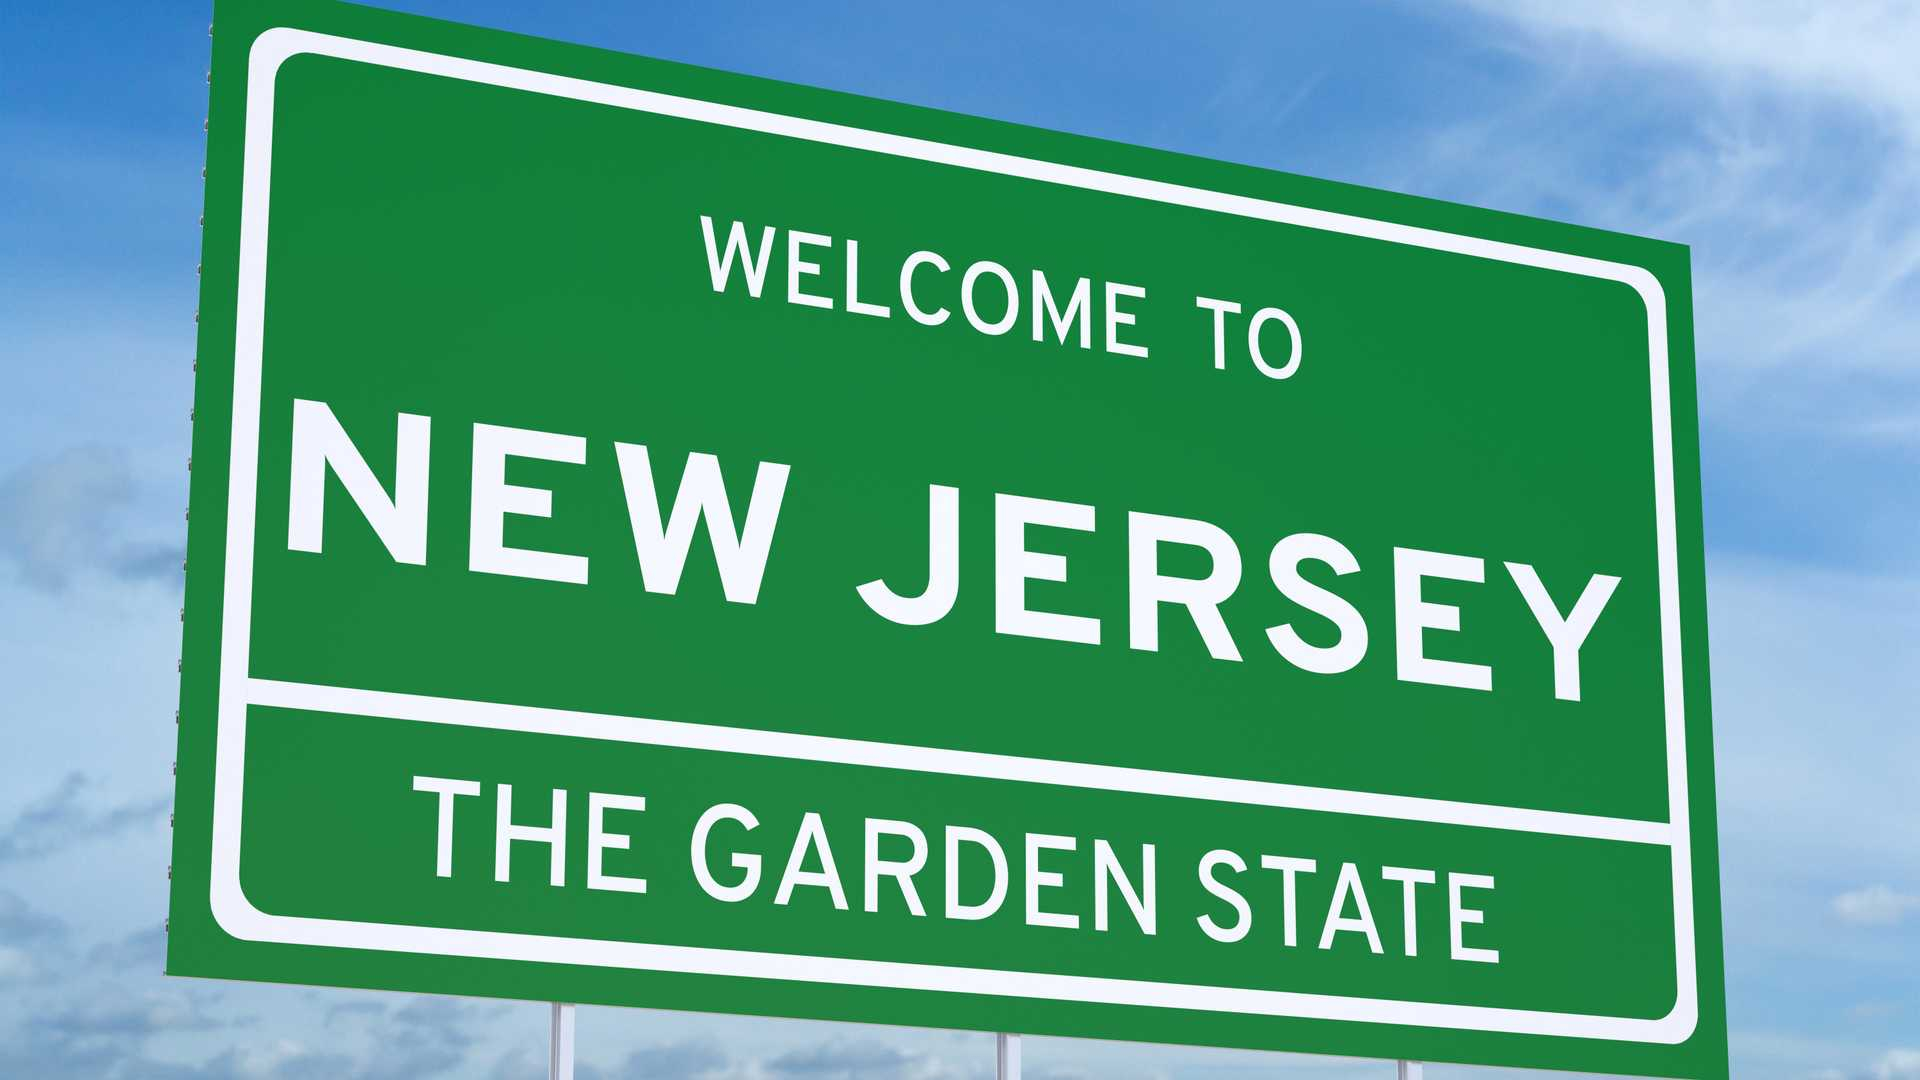 The Best Car Insurance In New Jersey 2020 in sizing 1920 X 1080